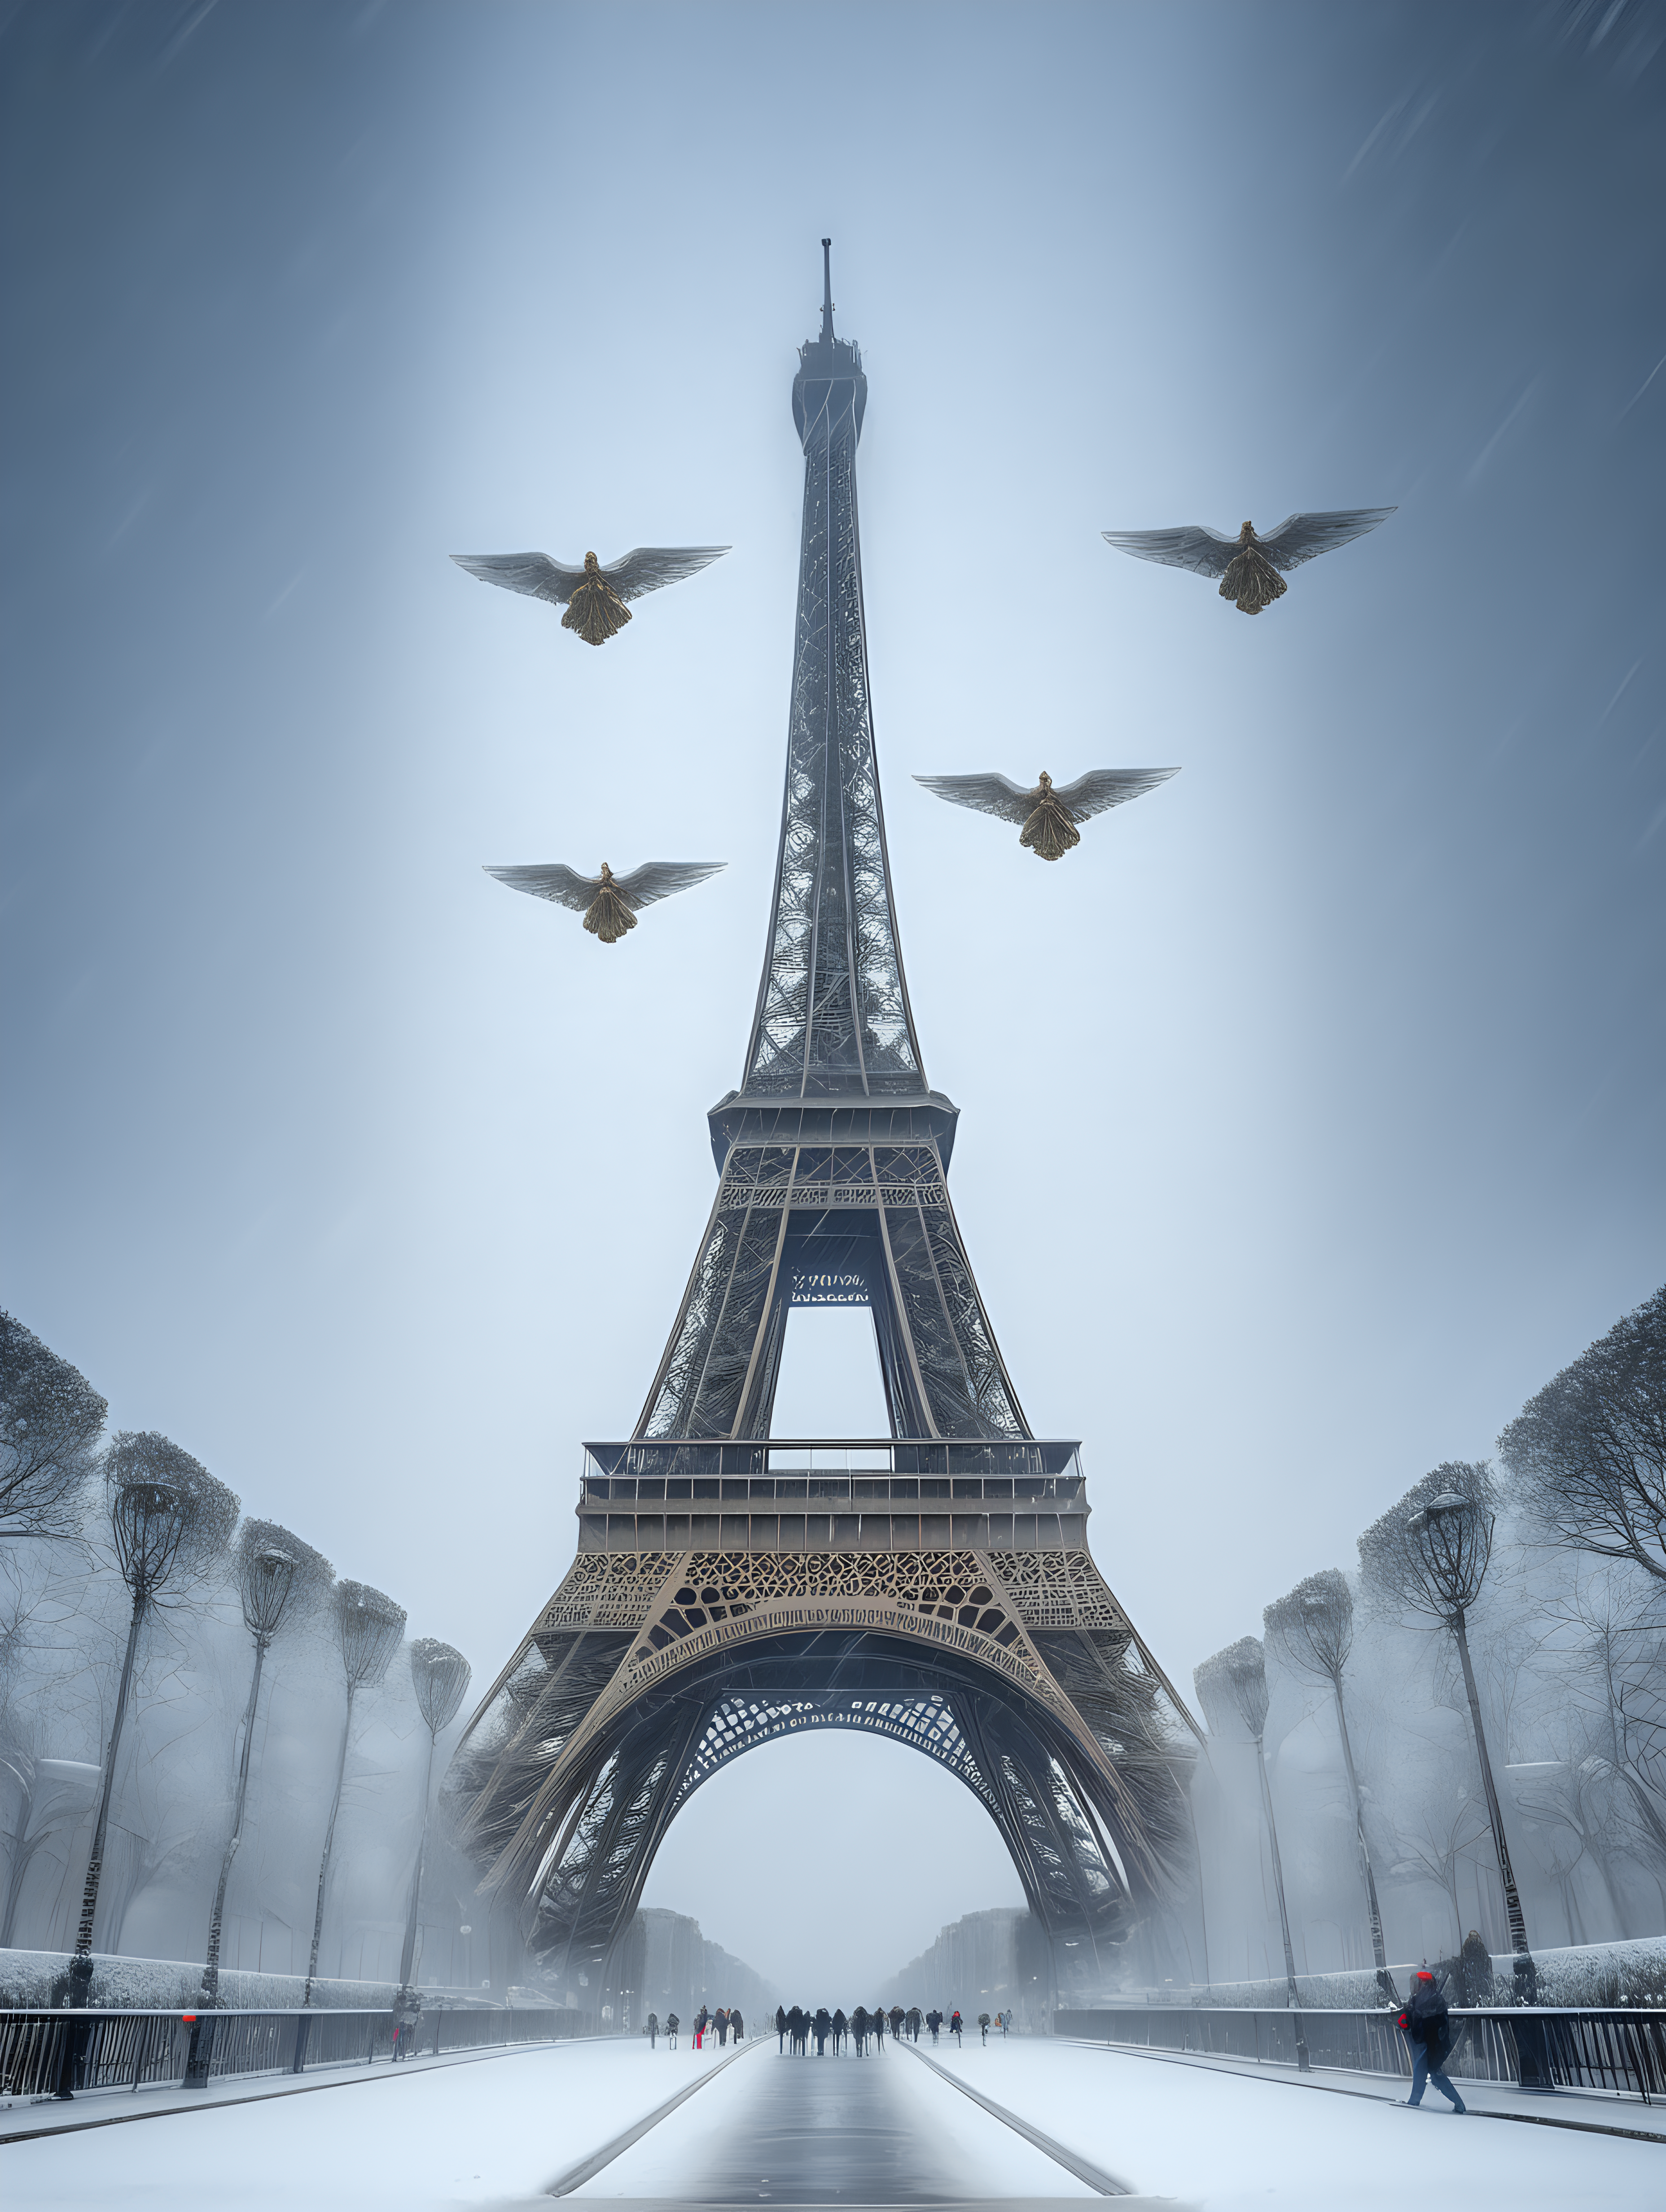 Eiffel tower in winter snow storm with 3